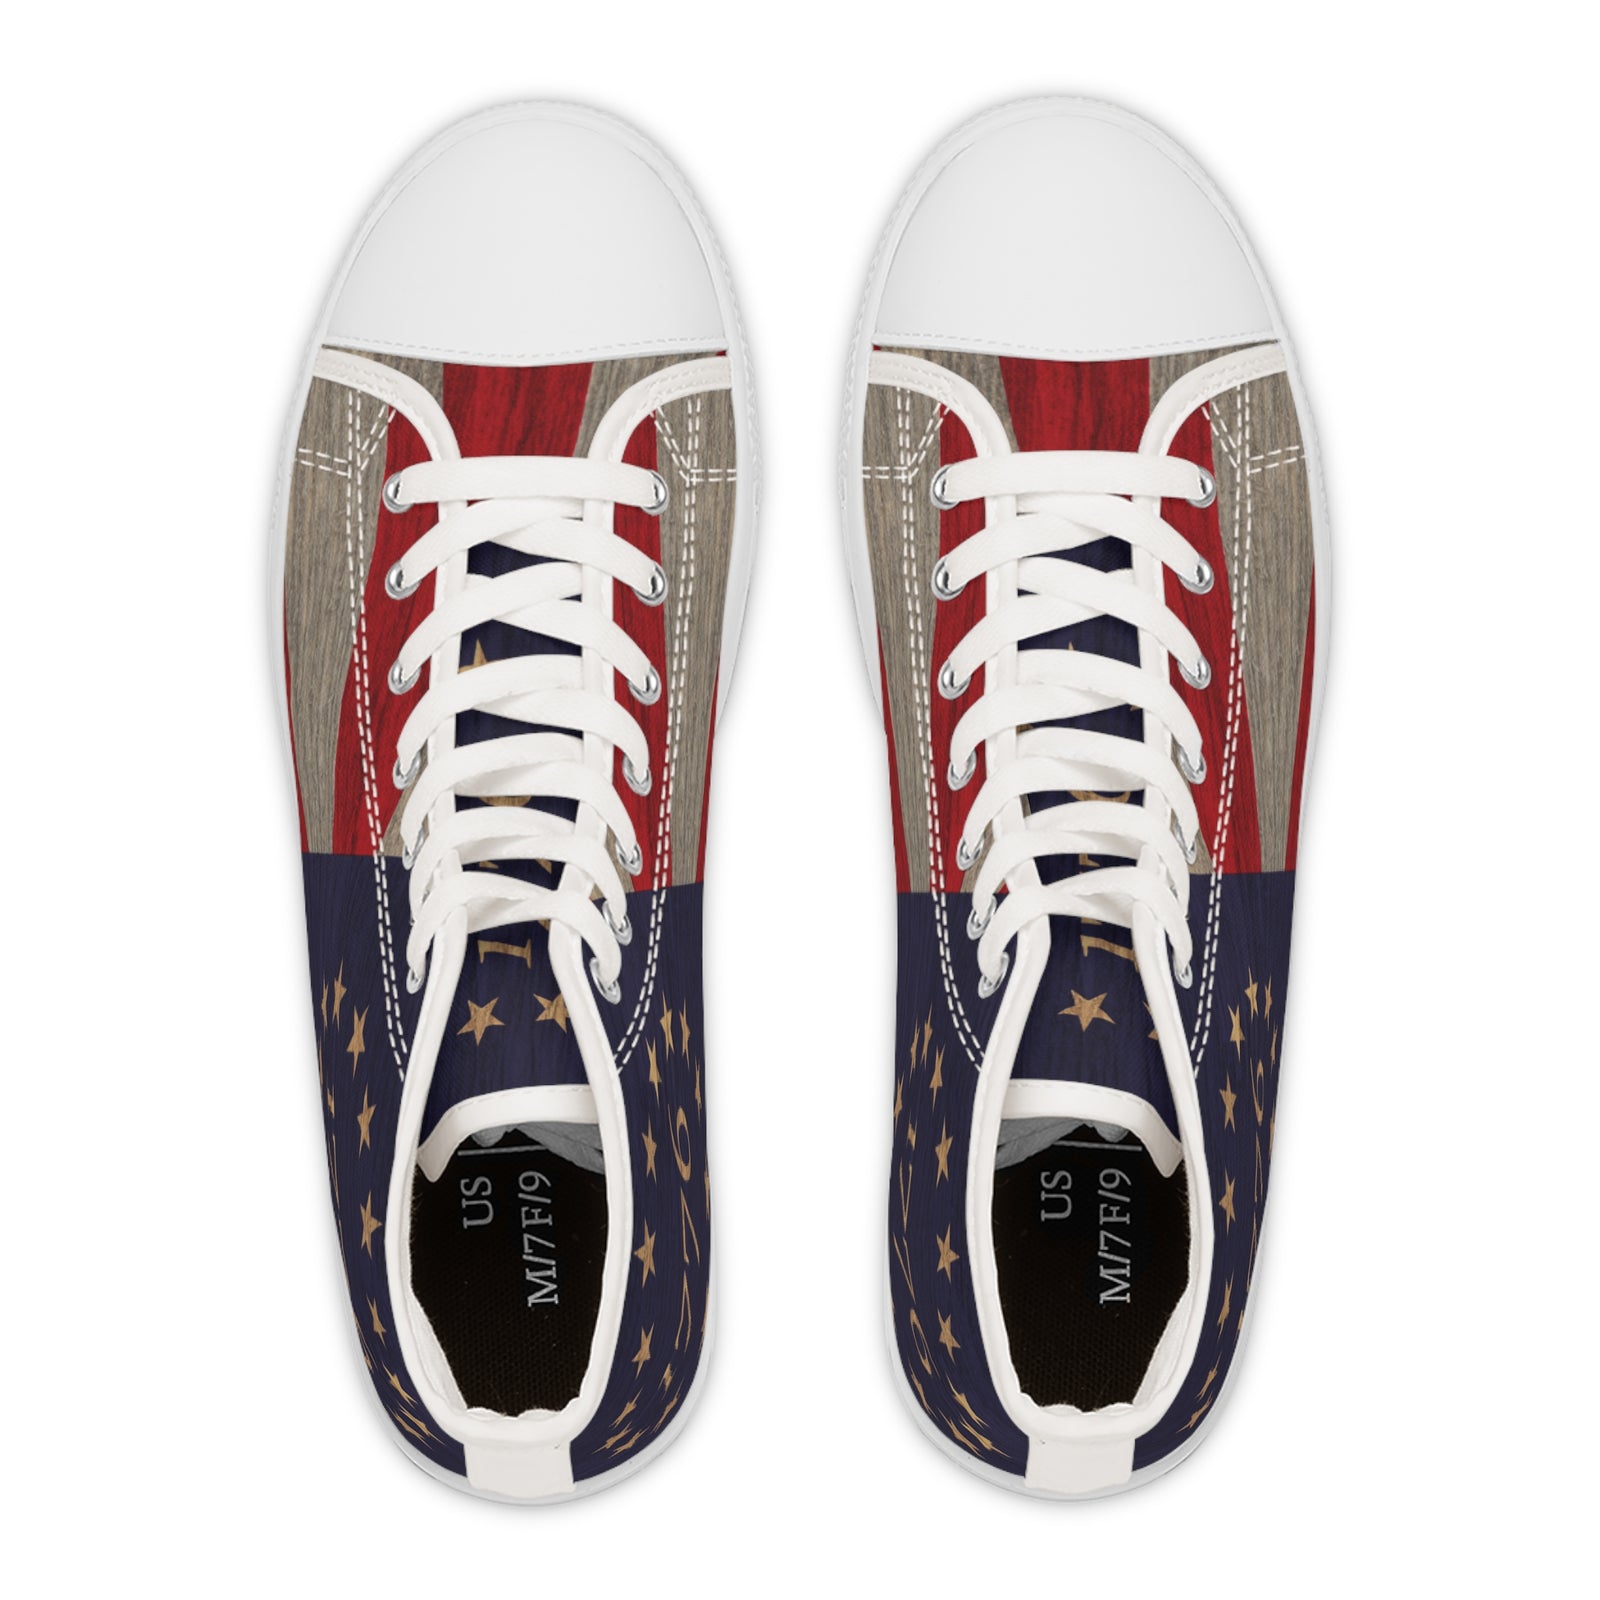 Betsy Ross Flag Women's High Top Sneakers